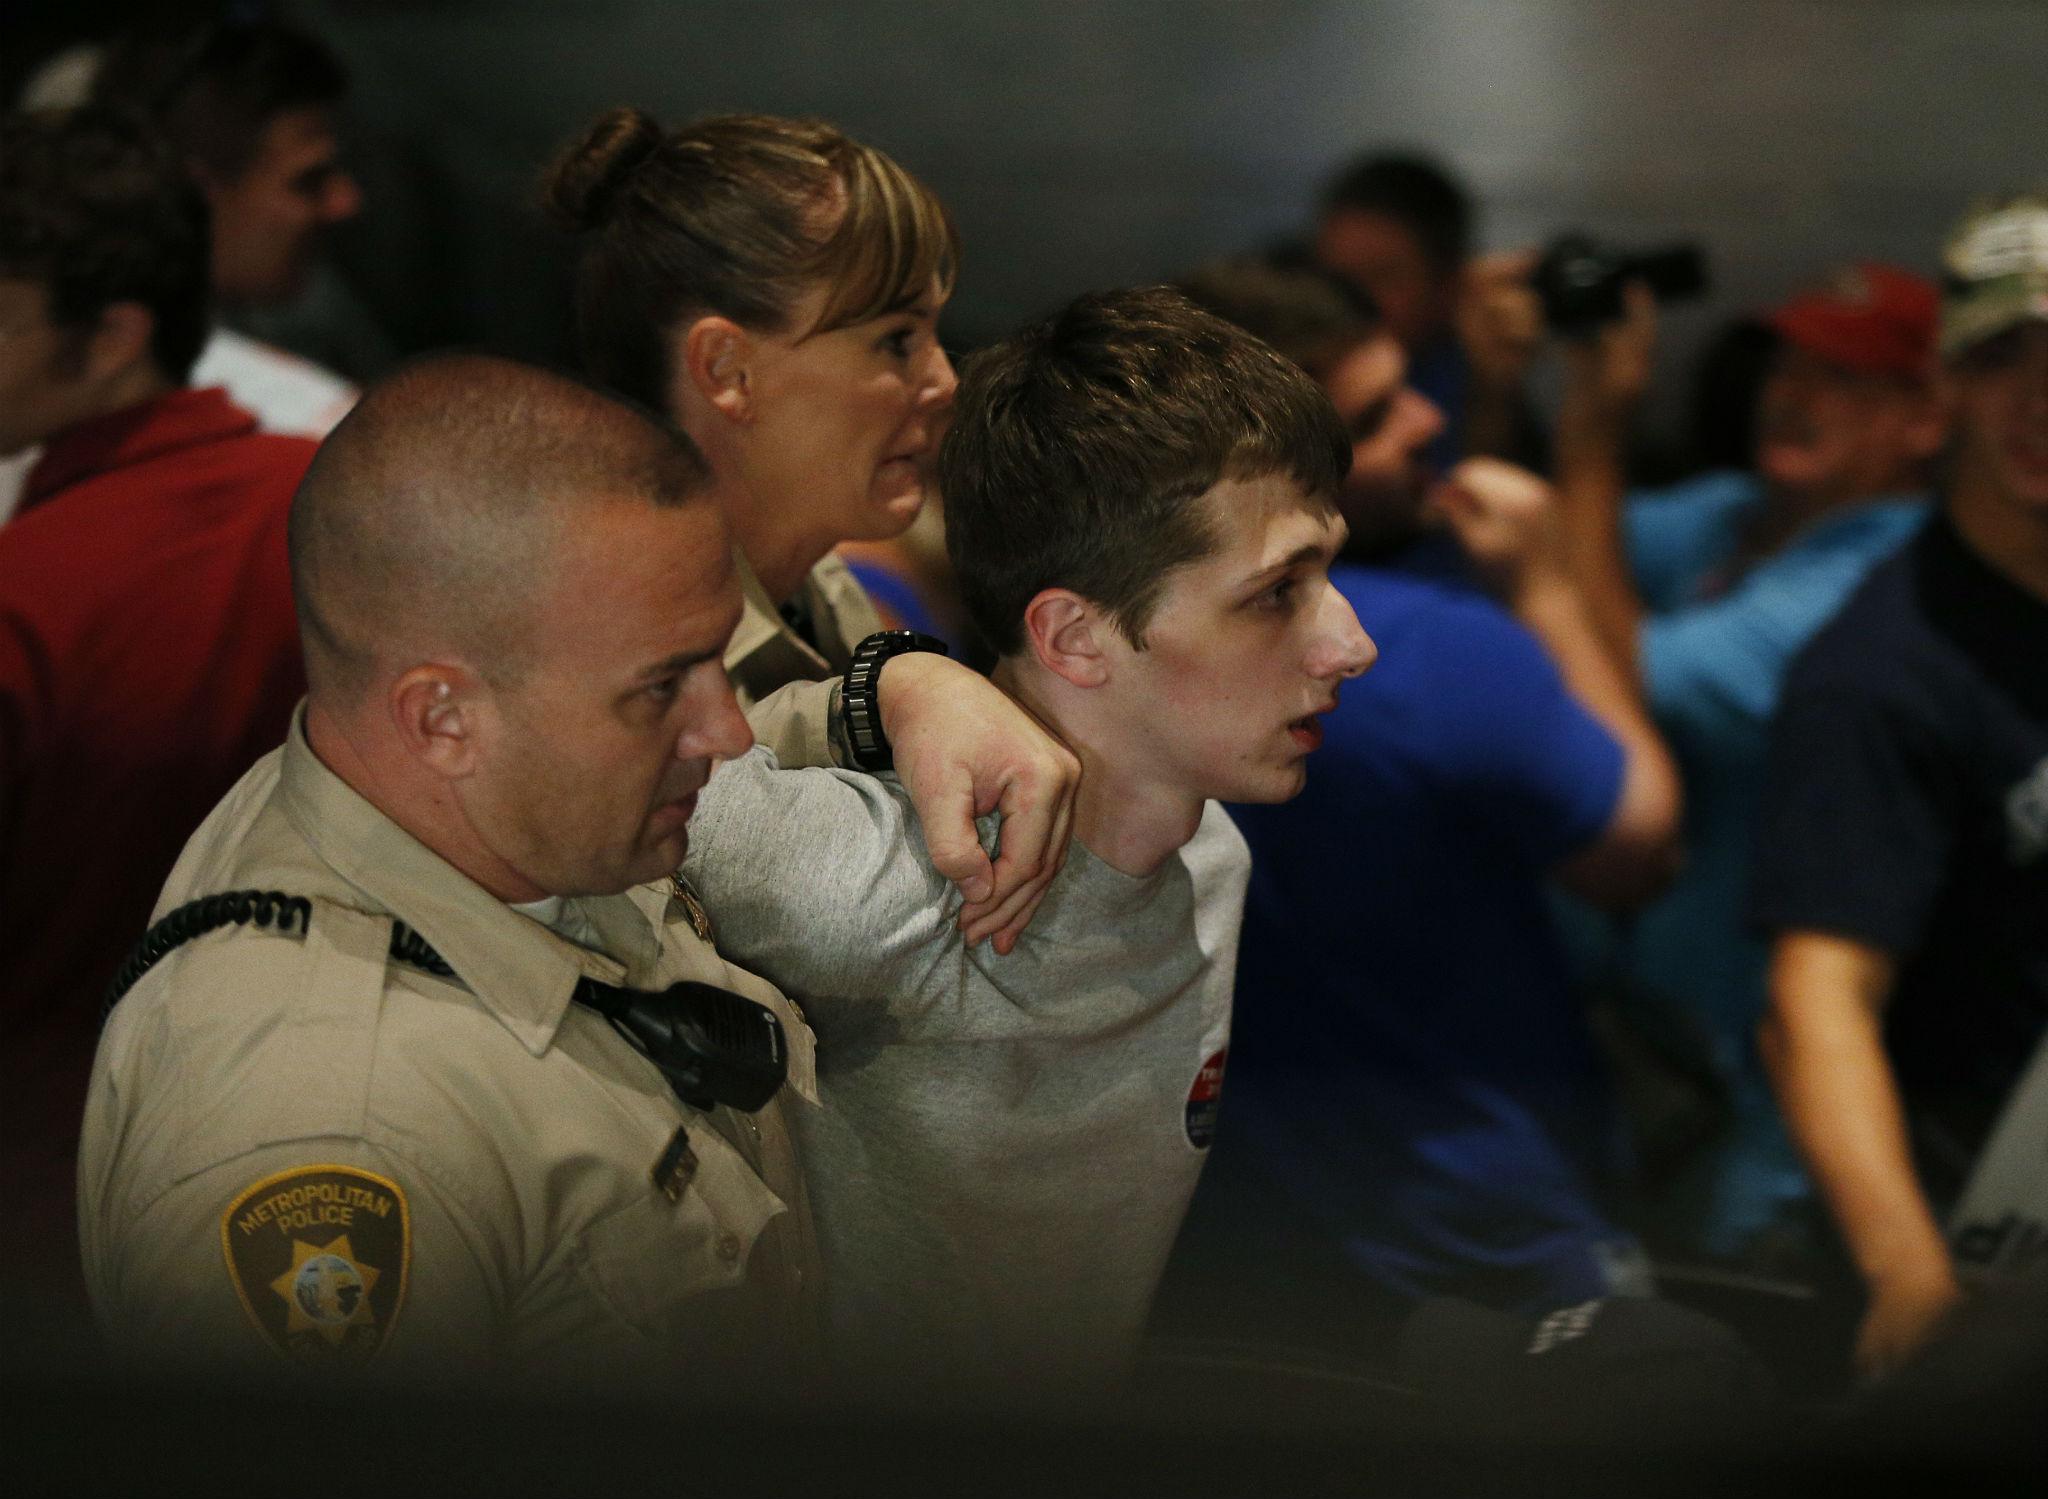 Michael Sandford is removed by police from a Donald Trump rally at the Treasure Island casino in Las Vegas on Saturday 18 June